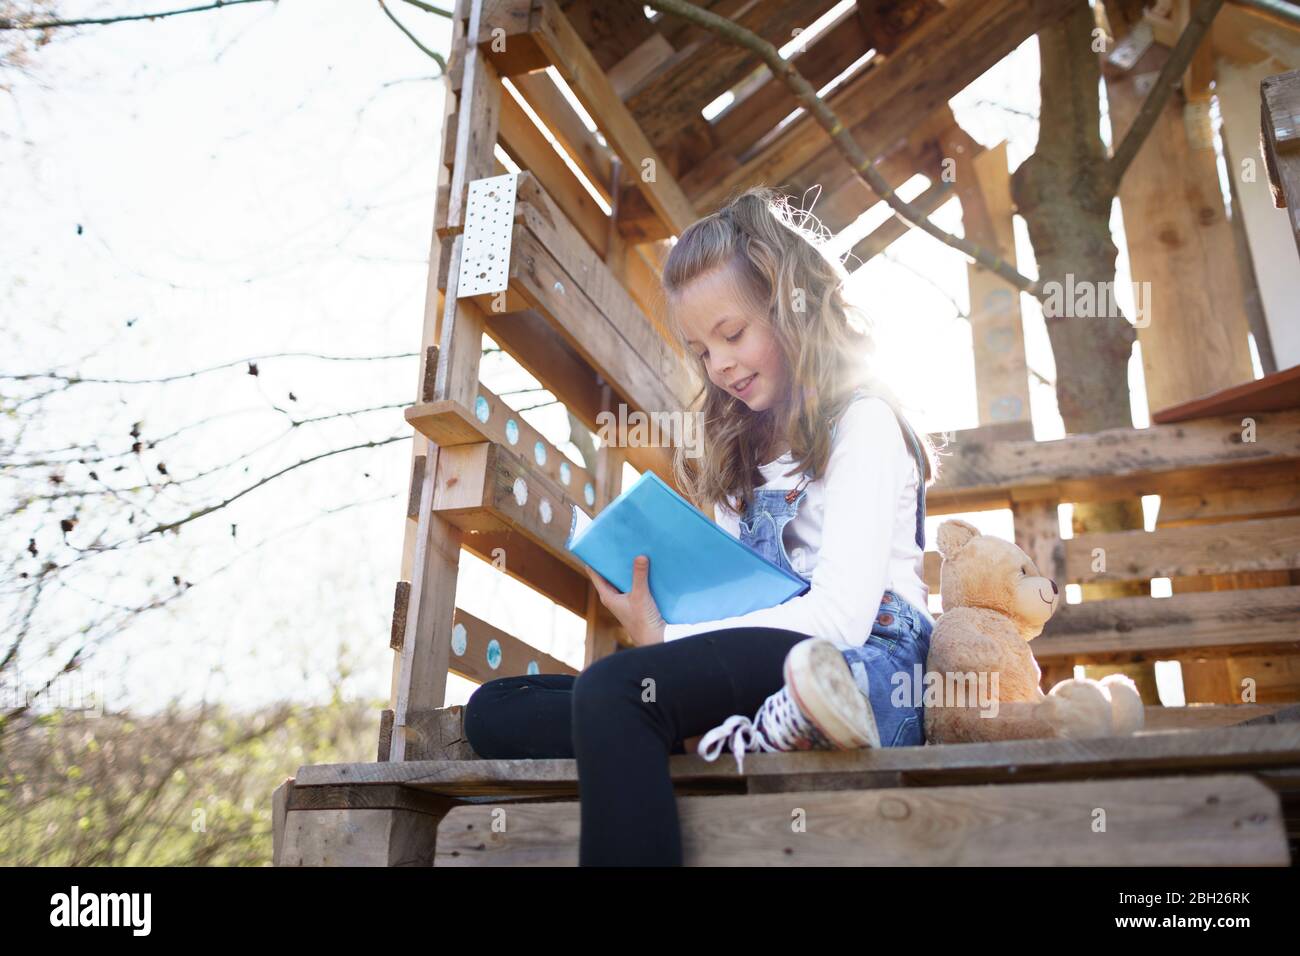 Girl sitting in garden at tree house and writing something in her blue diary Stock Photo